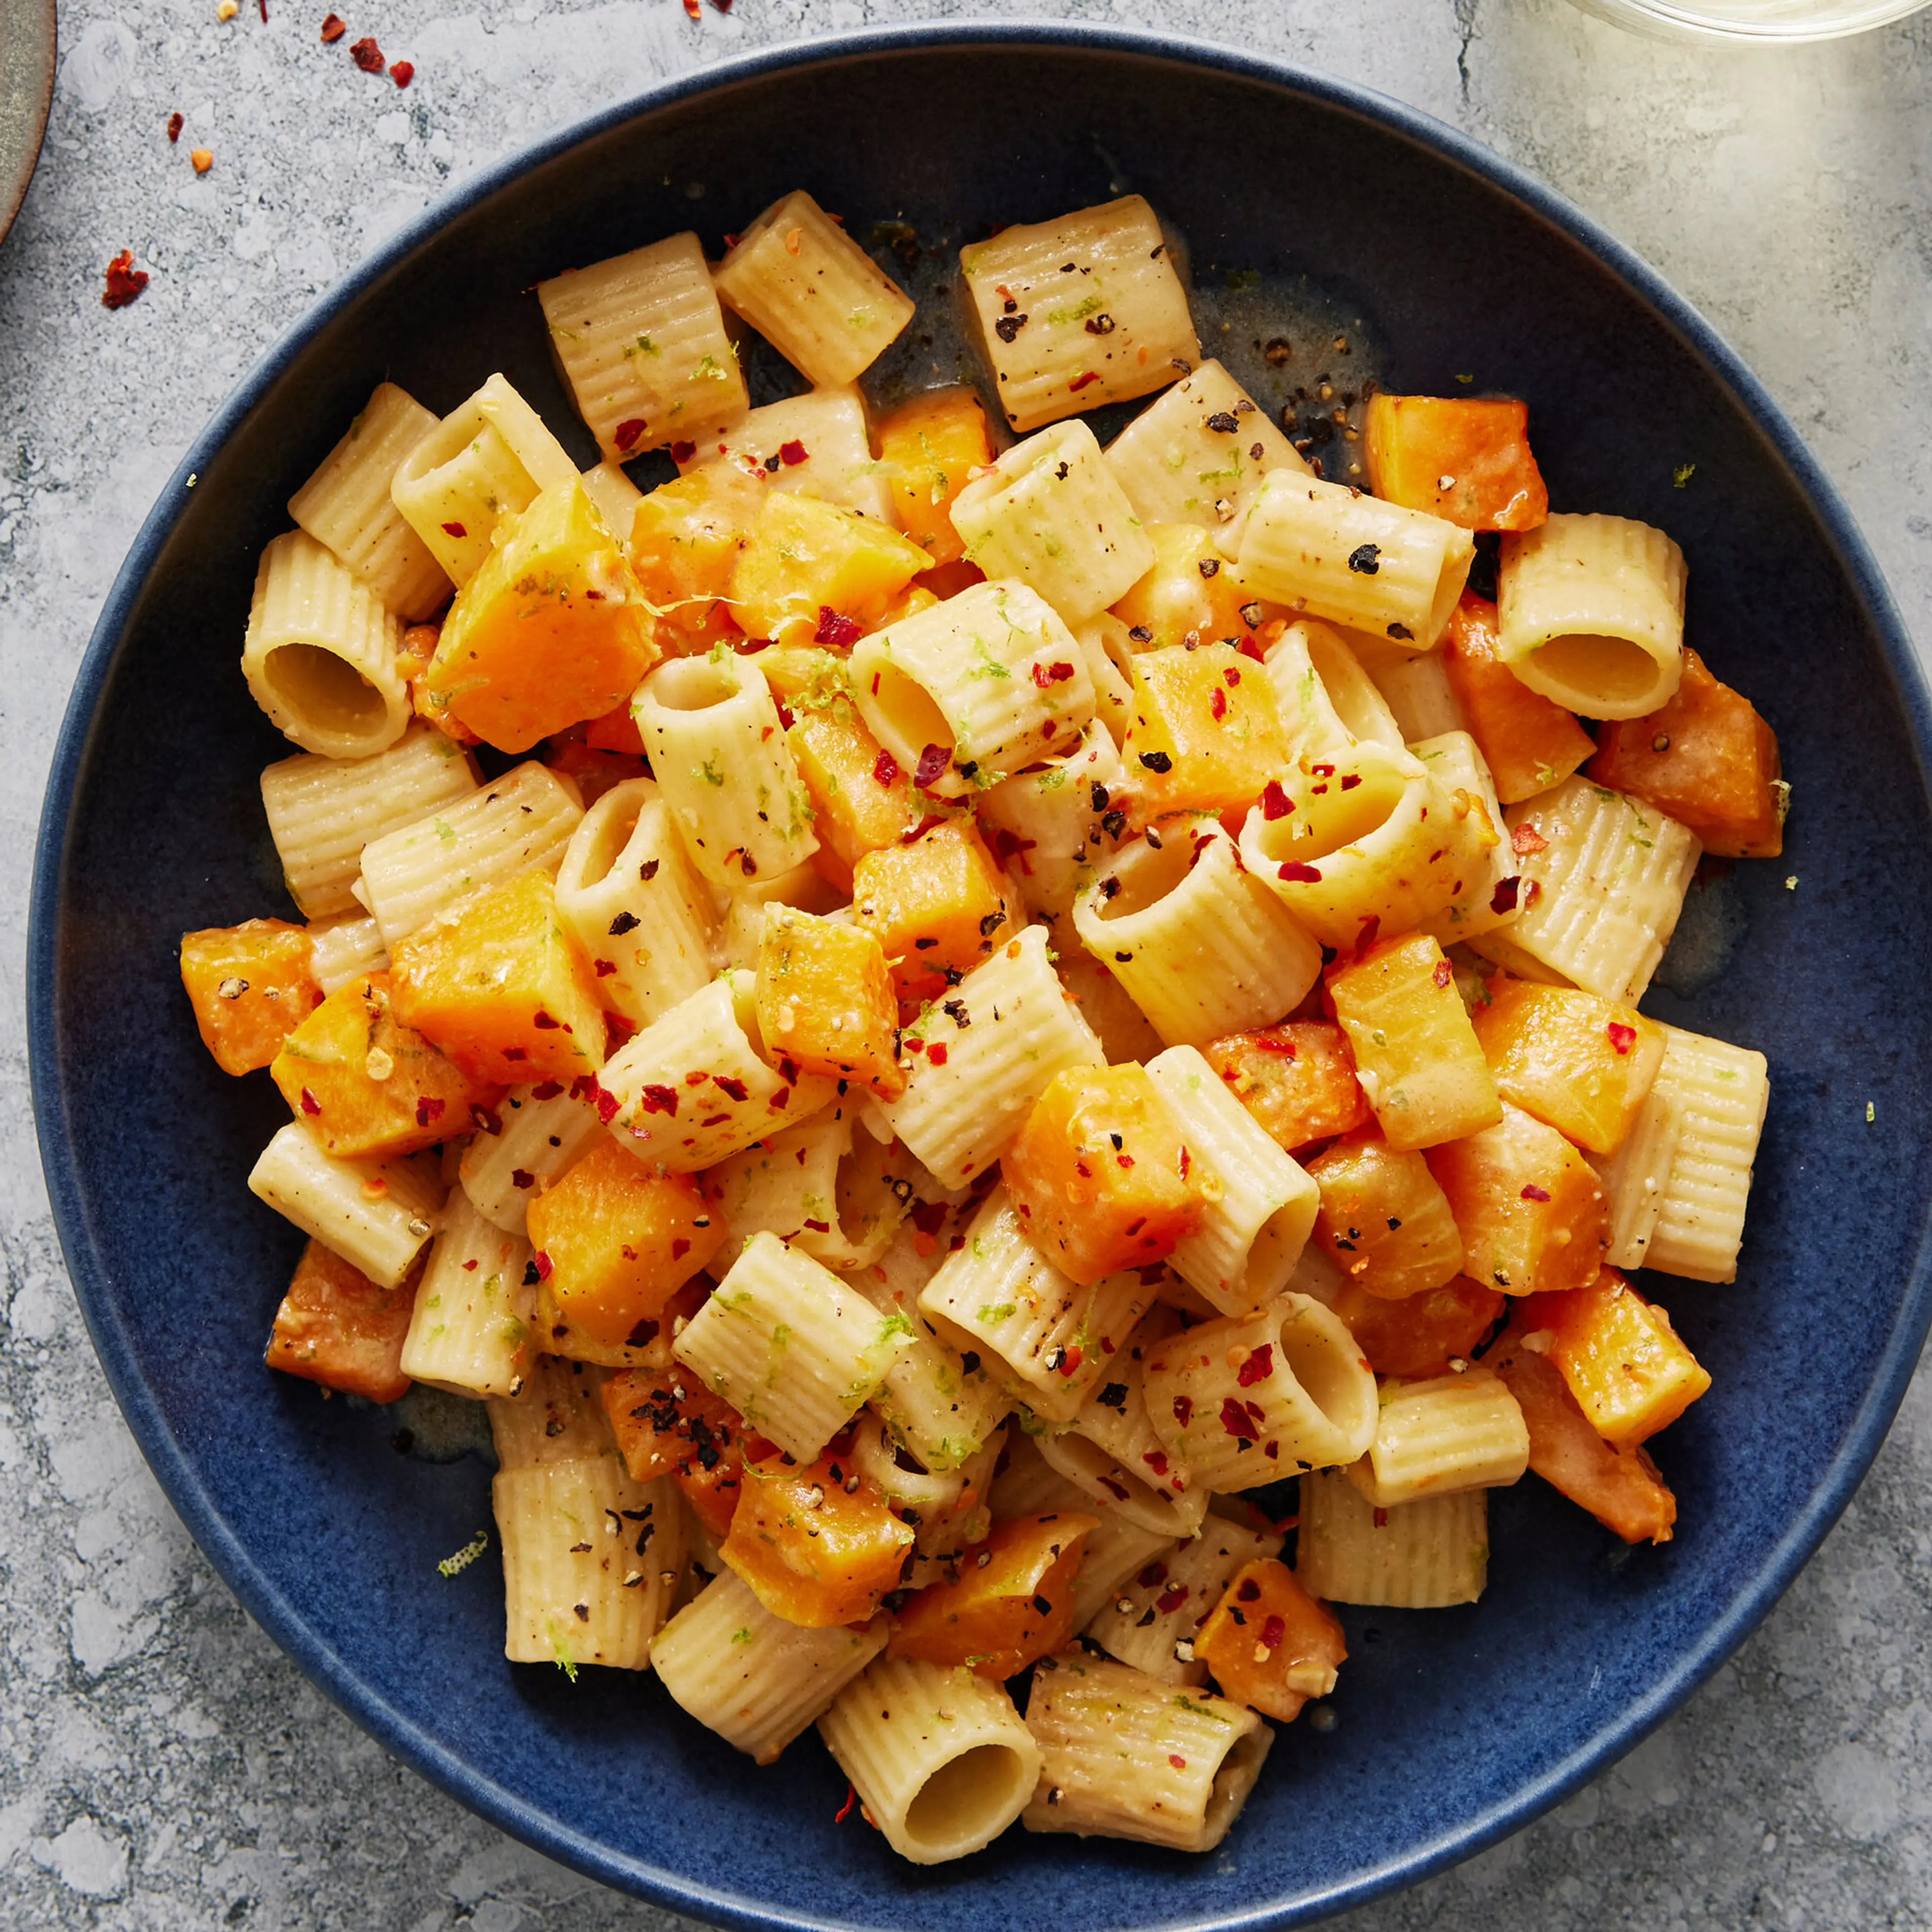 Miso-Butter Pasta With Butternut Squash